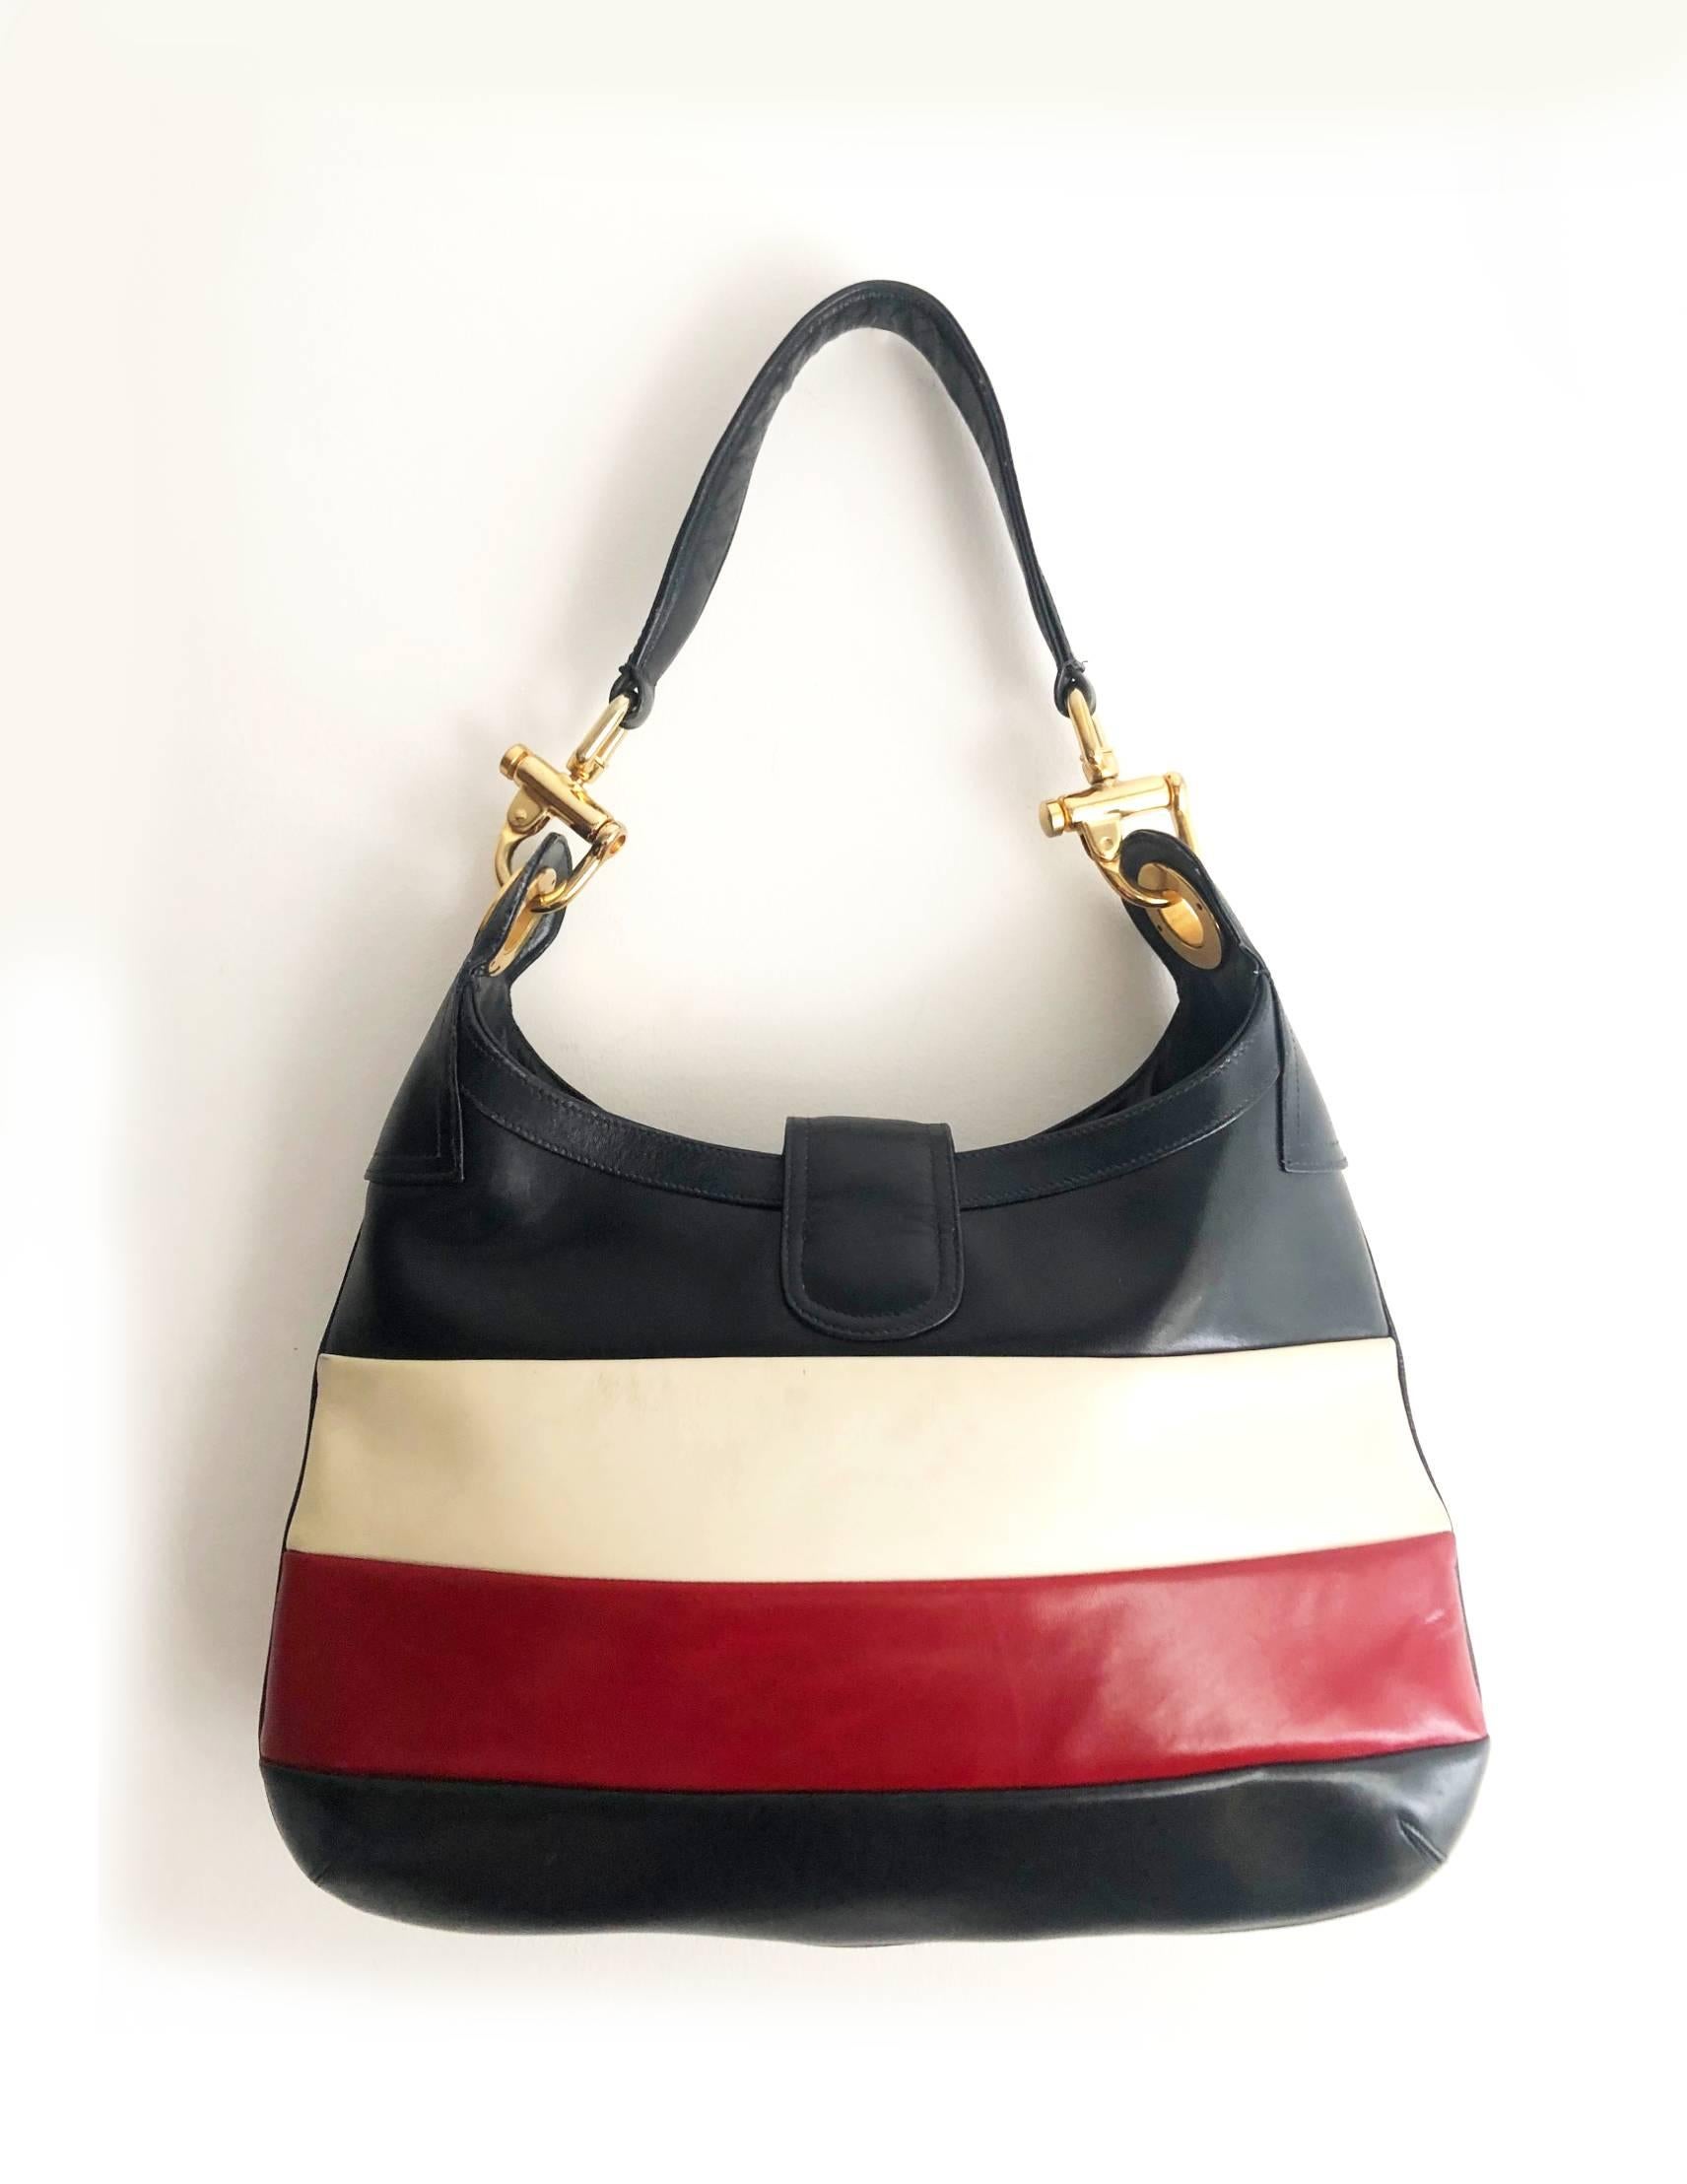 FREE and WORLDWIDE DELIVERY 

Rare Celine Paris tote bag in thick leather, navy blue, red and white stripe, gold tone metal ware, lining in navy blue leather, inside zipped pocket, Made in Italy 

Condition: 1970s, excellent vintage, slight sign of